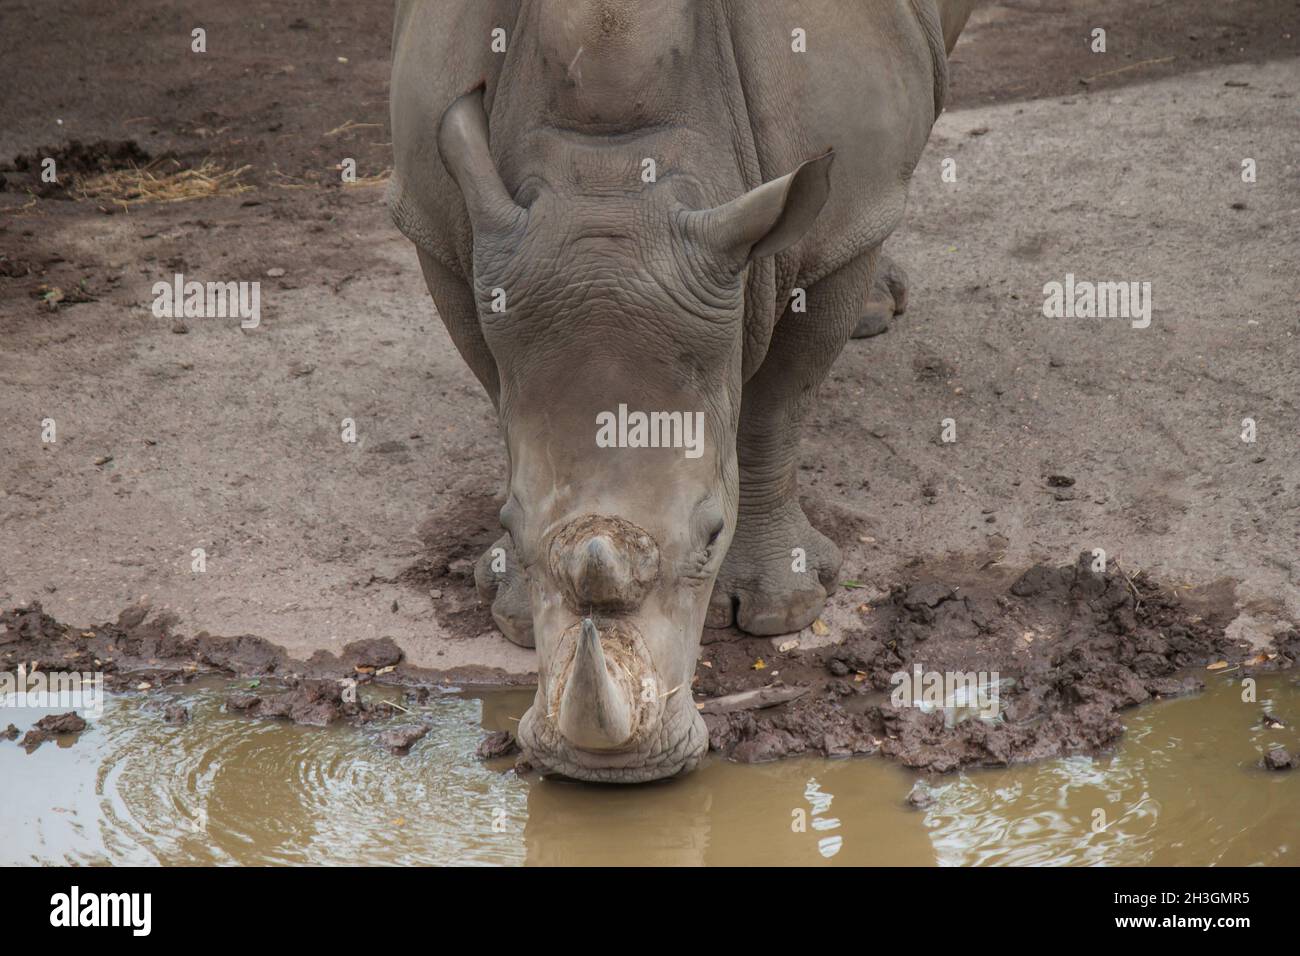 Rhinoceros standing and drinking water Stock Photo